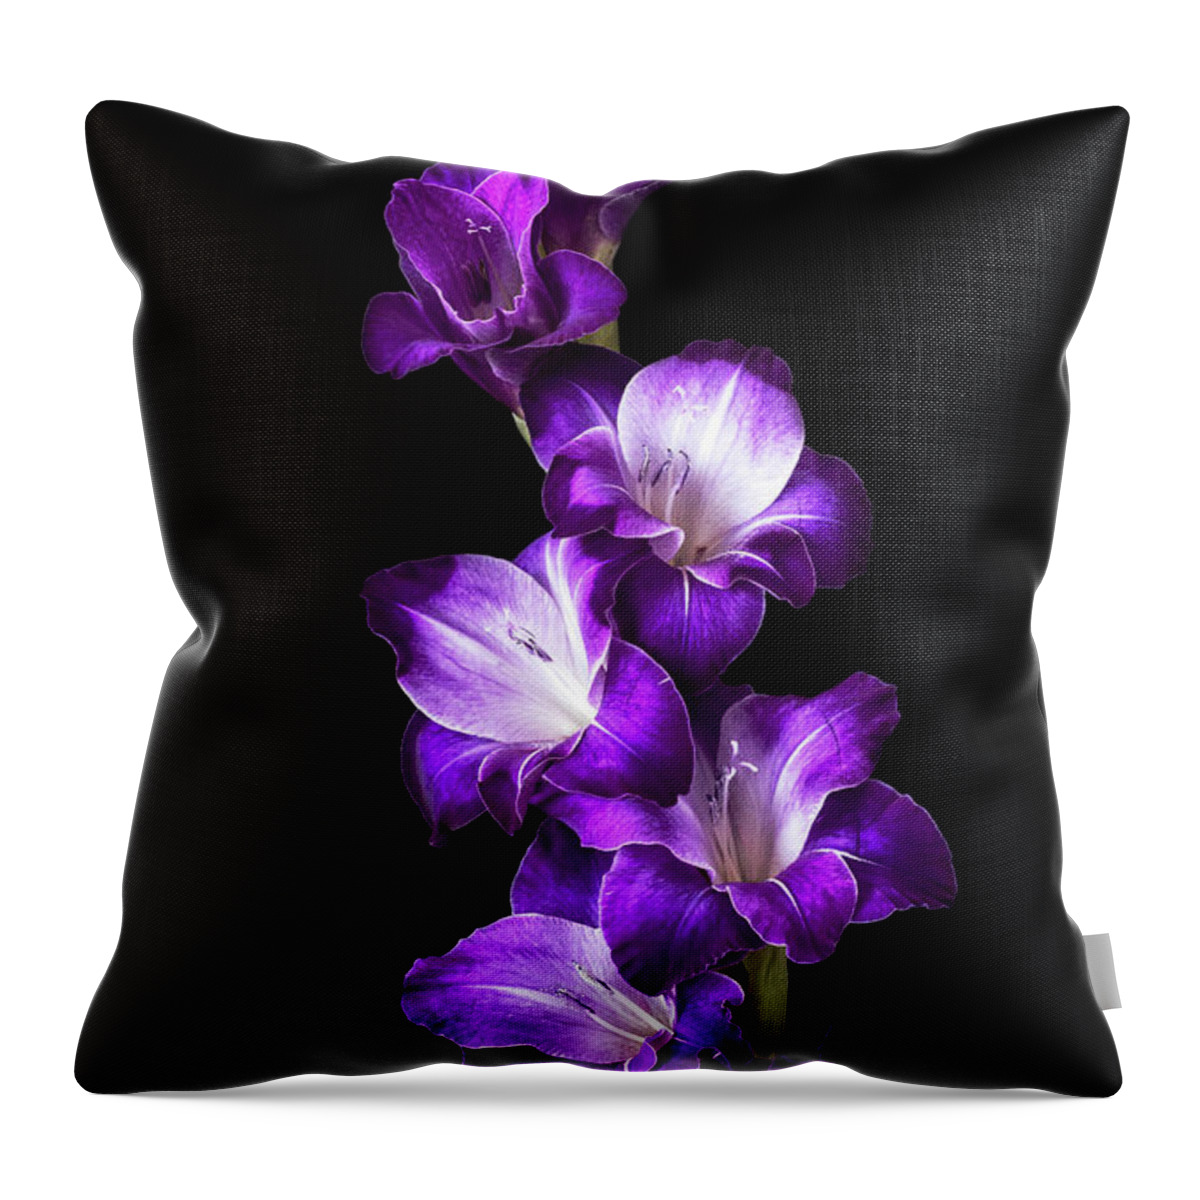 Gladiolus Throw Pillow featuring the photograph Purple Elegance by Cheryl Day